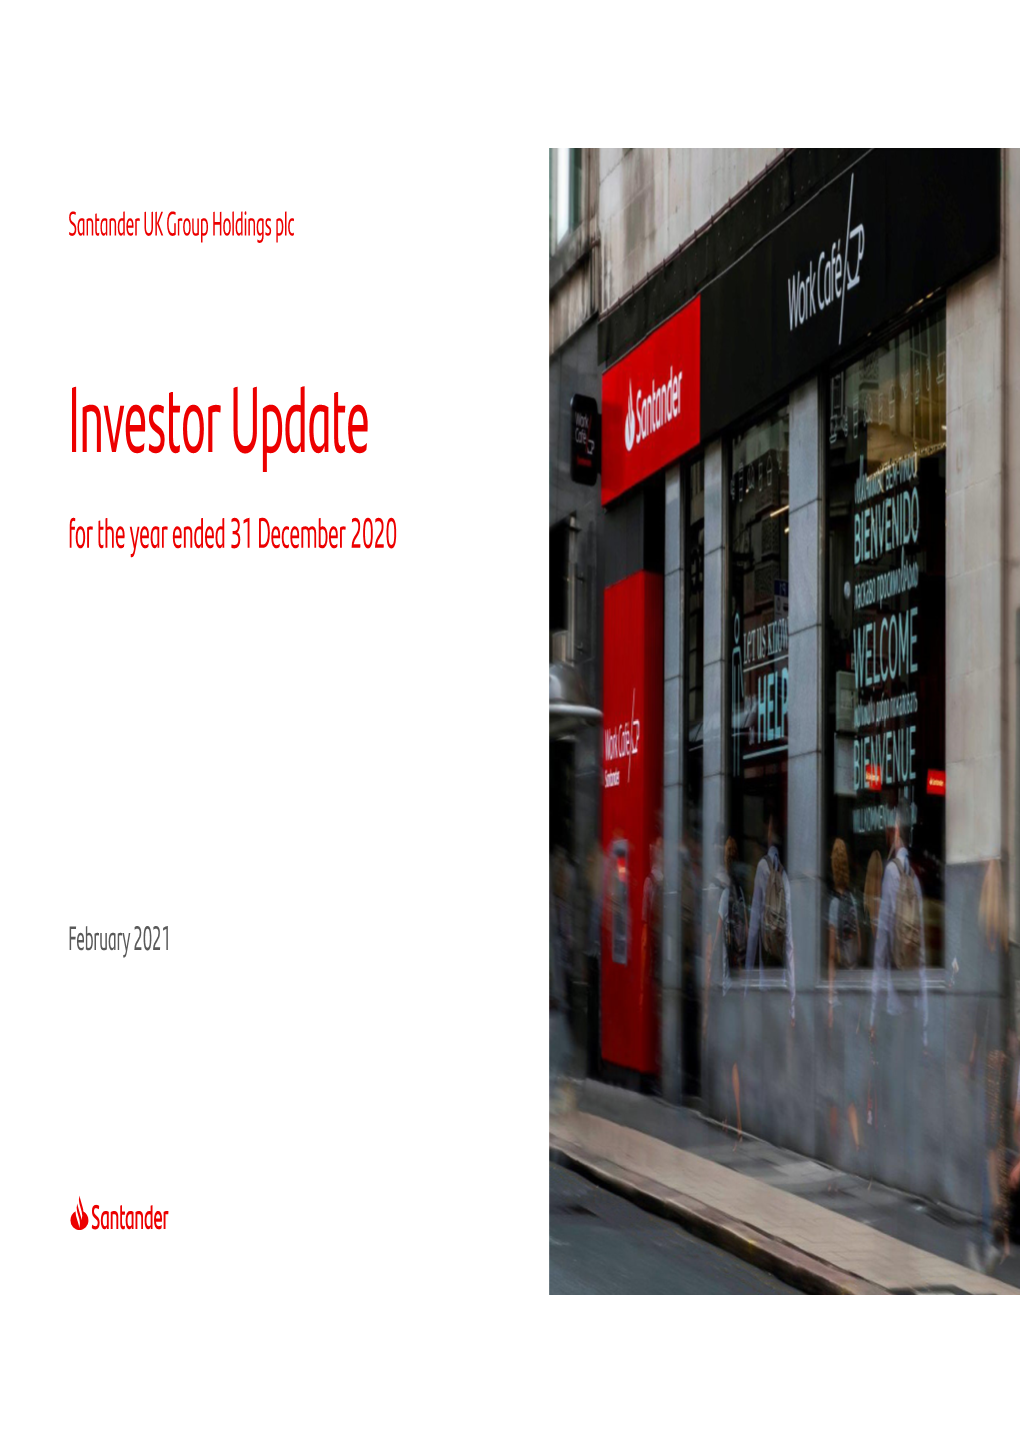 Investor Update for the Year Ended 31 December 2020